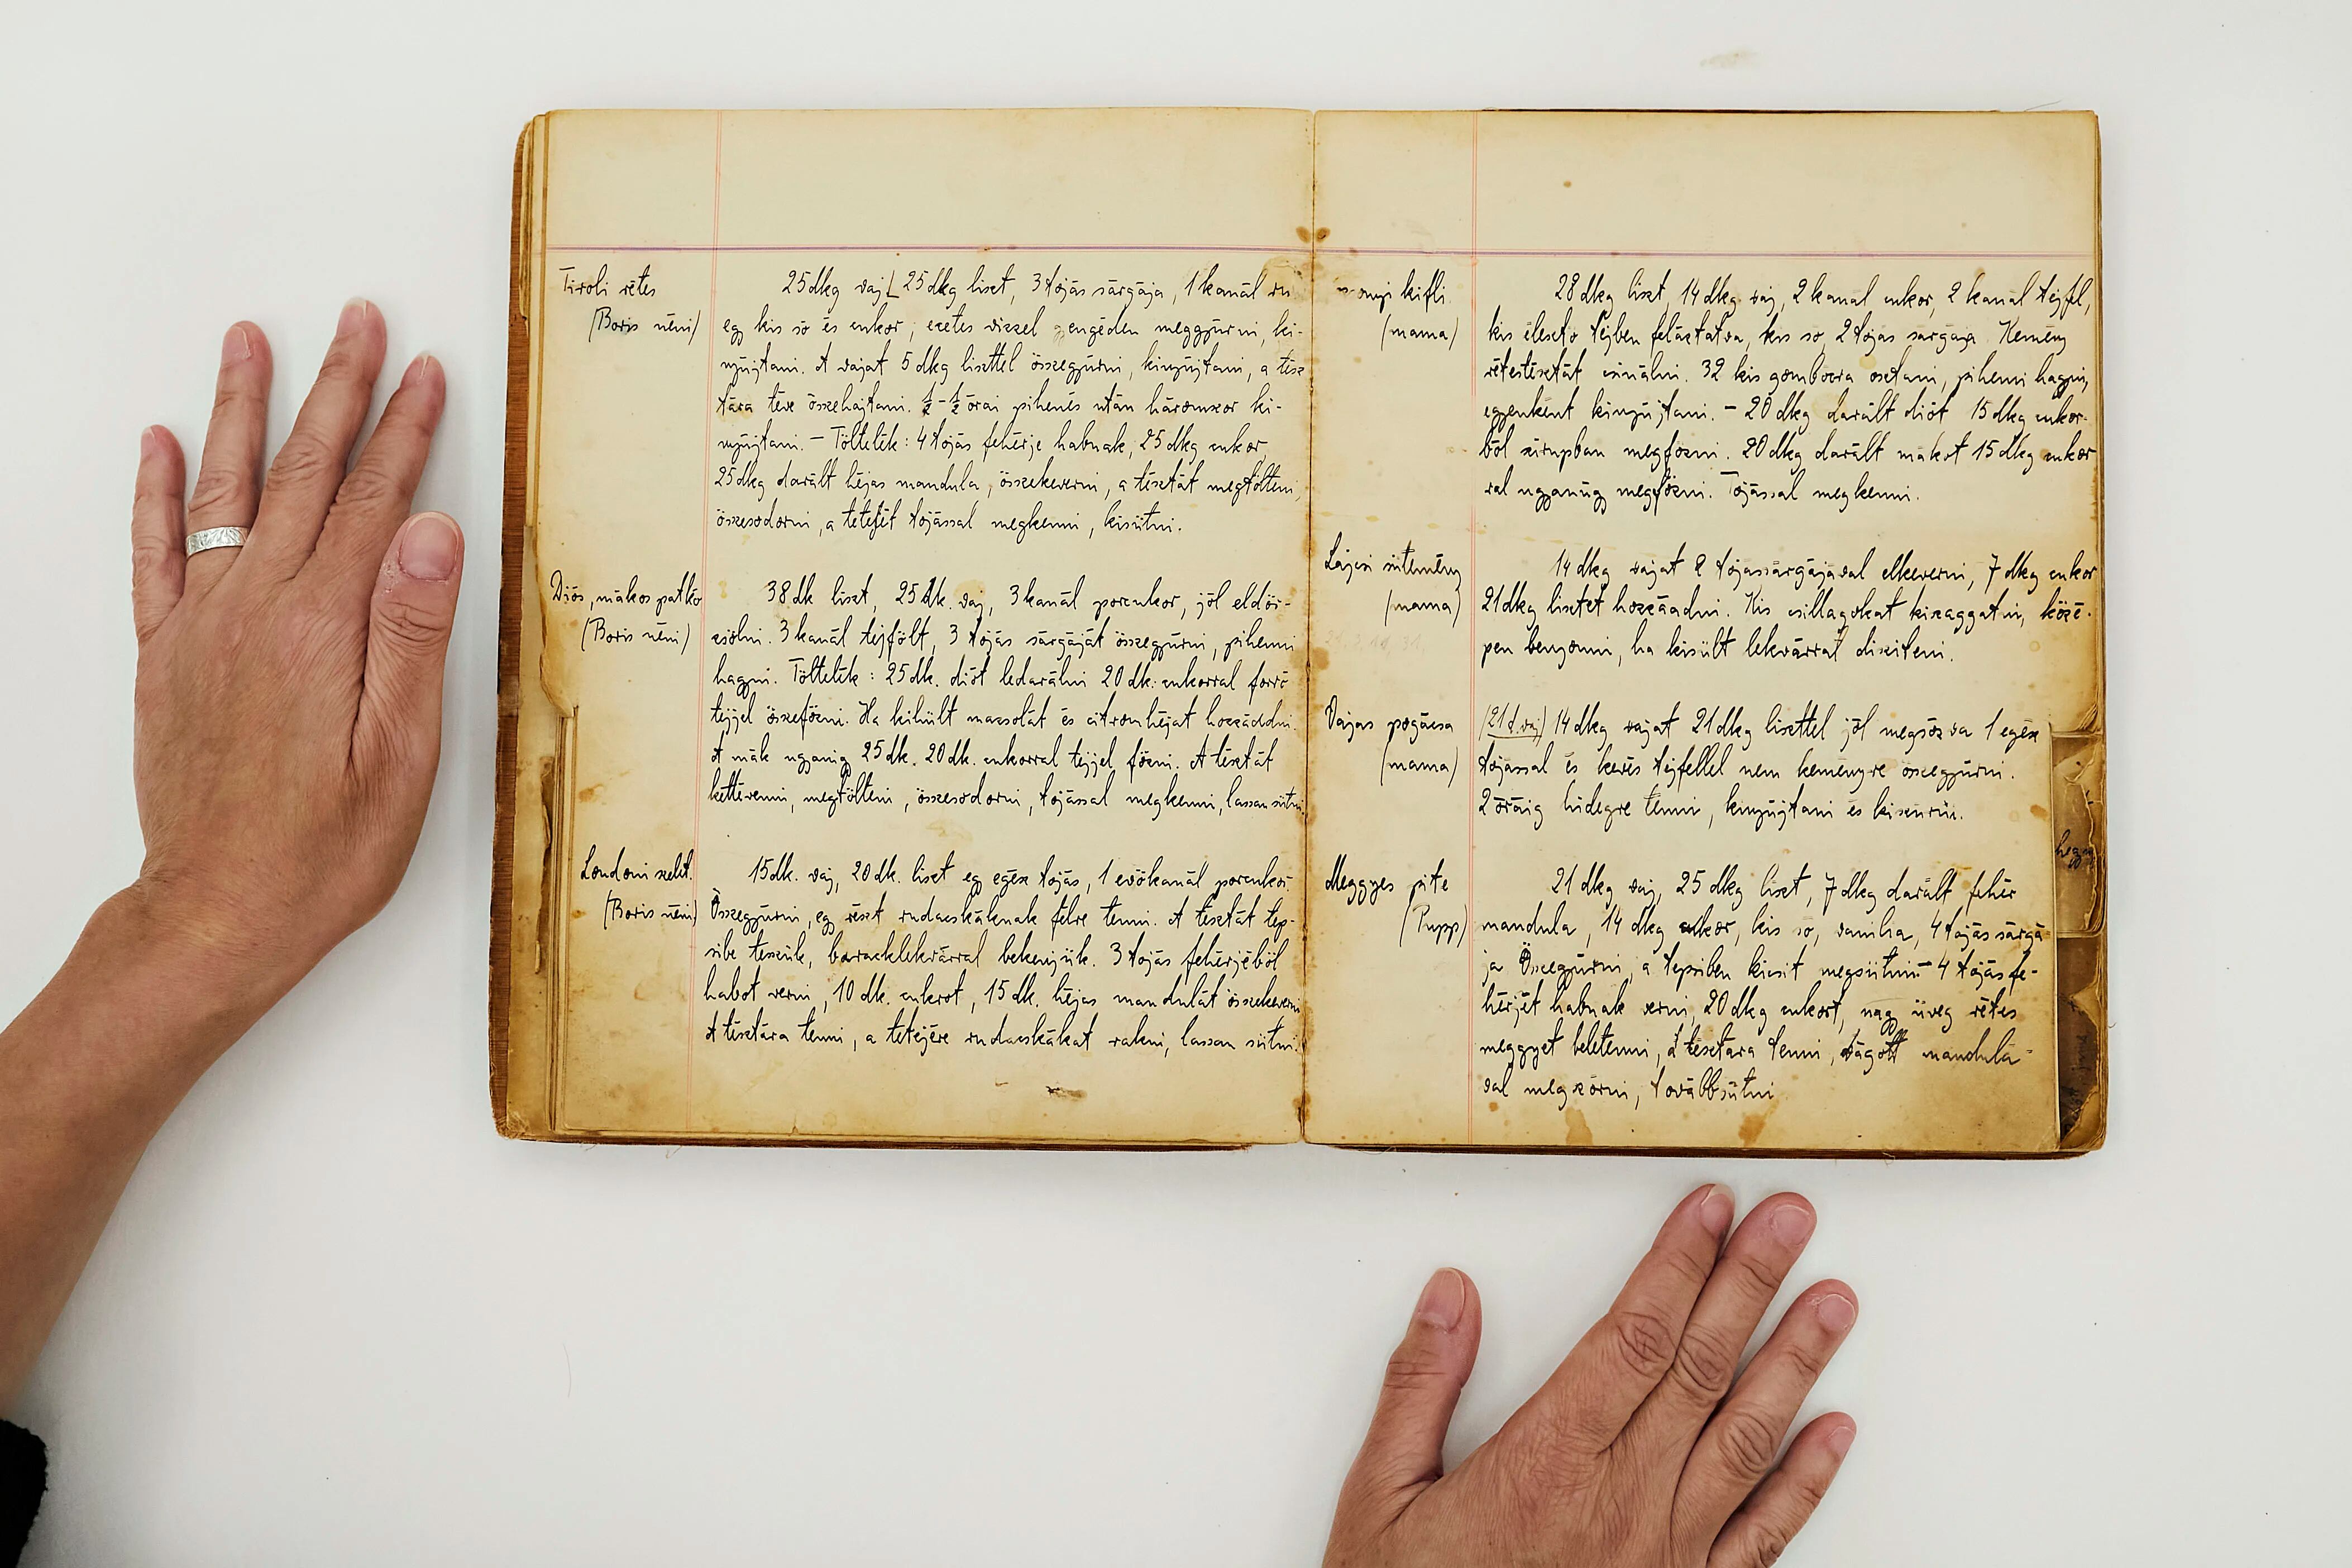 The original Fenves family cookbook, shown by Anne Marigza, a conservator for the U.S. Holocaust Memorial Museum. 